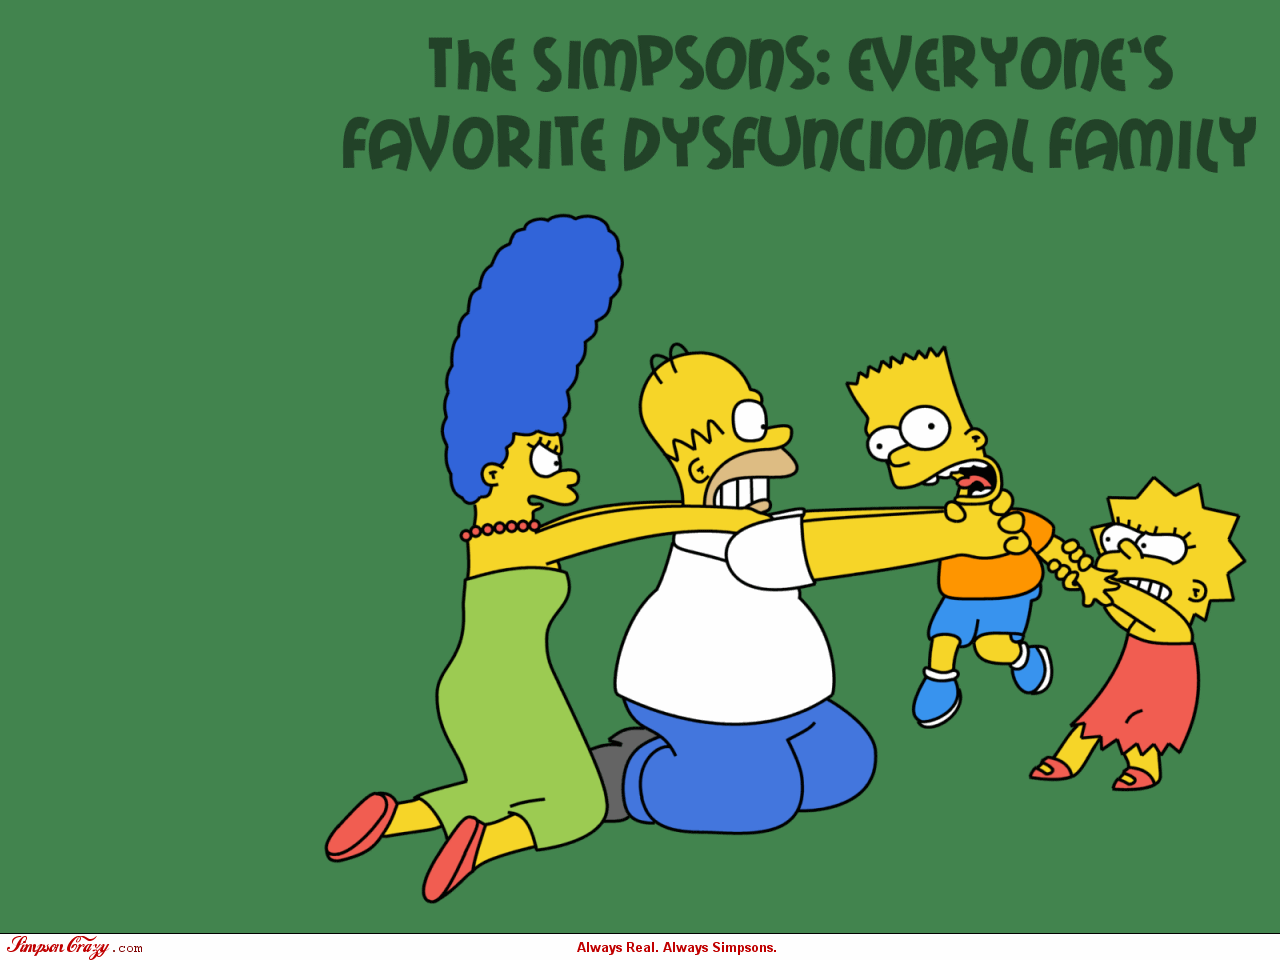 Homer Marge Bart Lisa The Simpsons Family Wallpapers